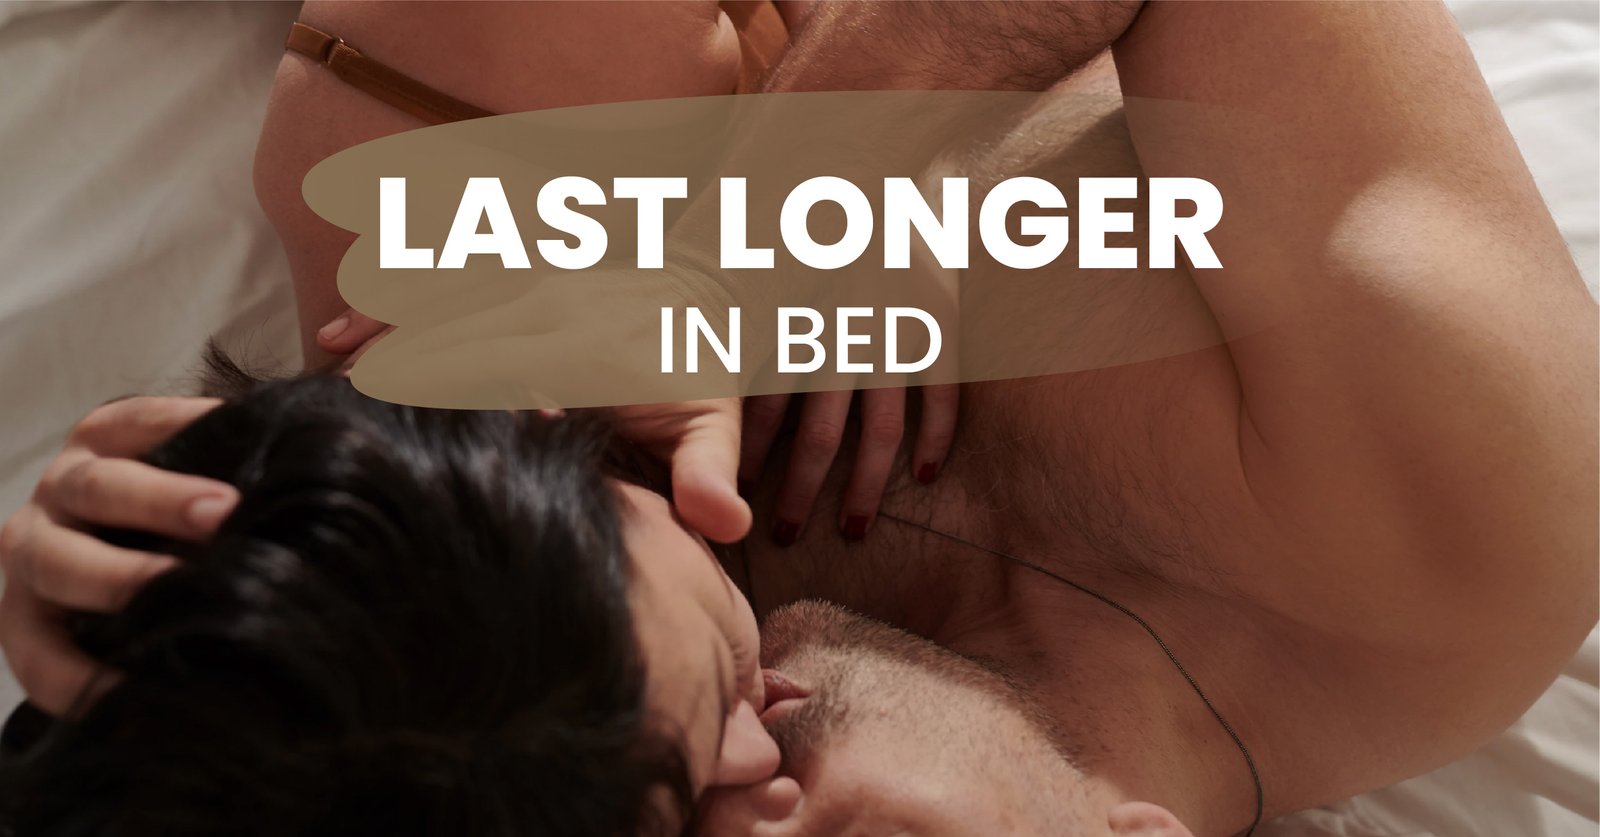 How to Last Longer in Bed